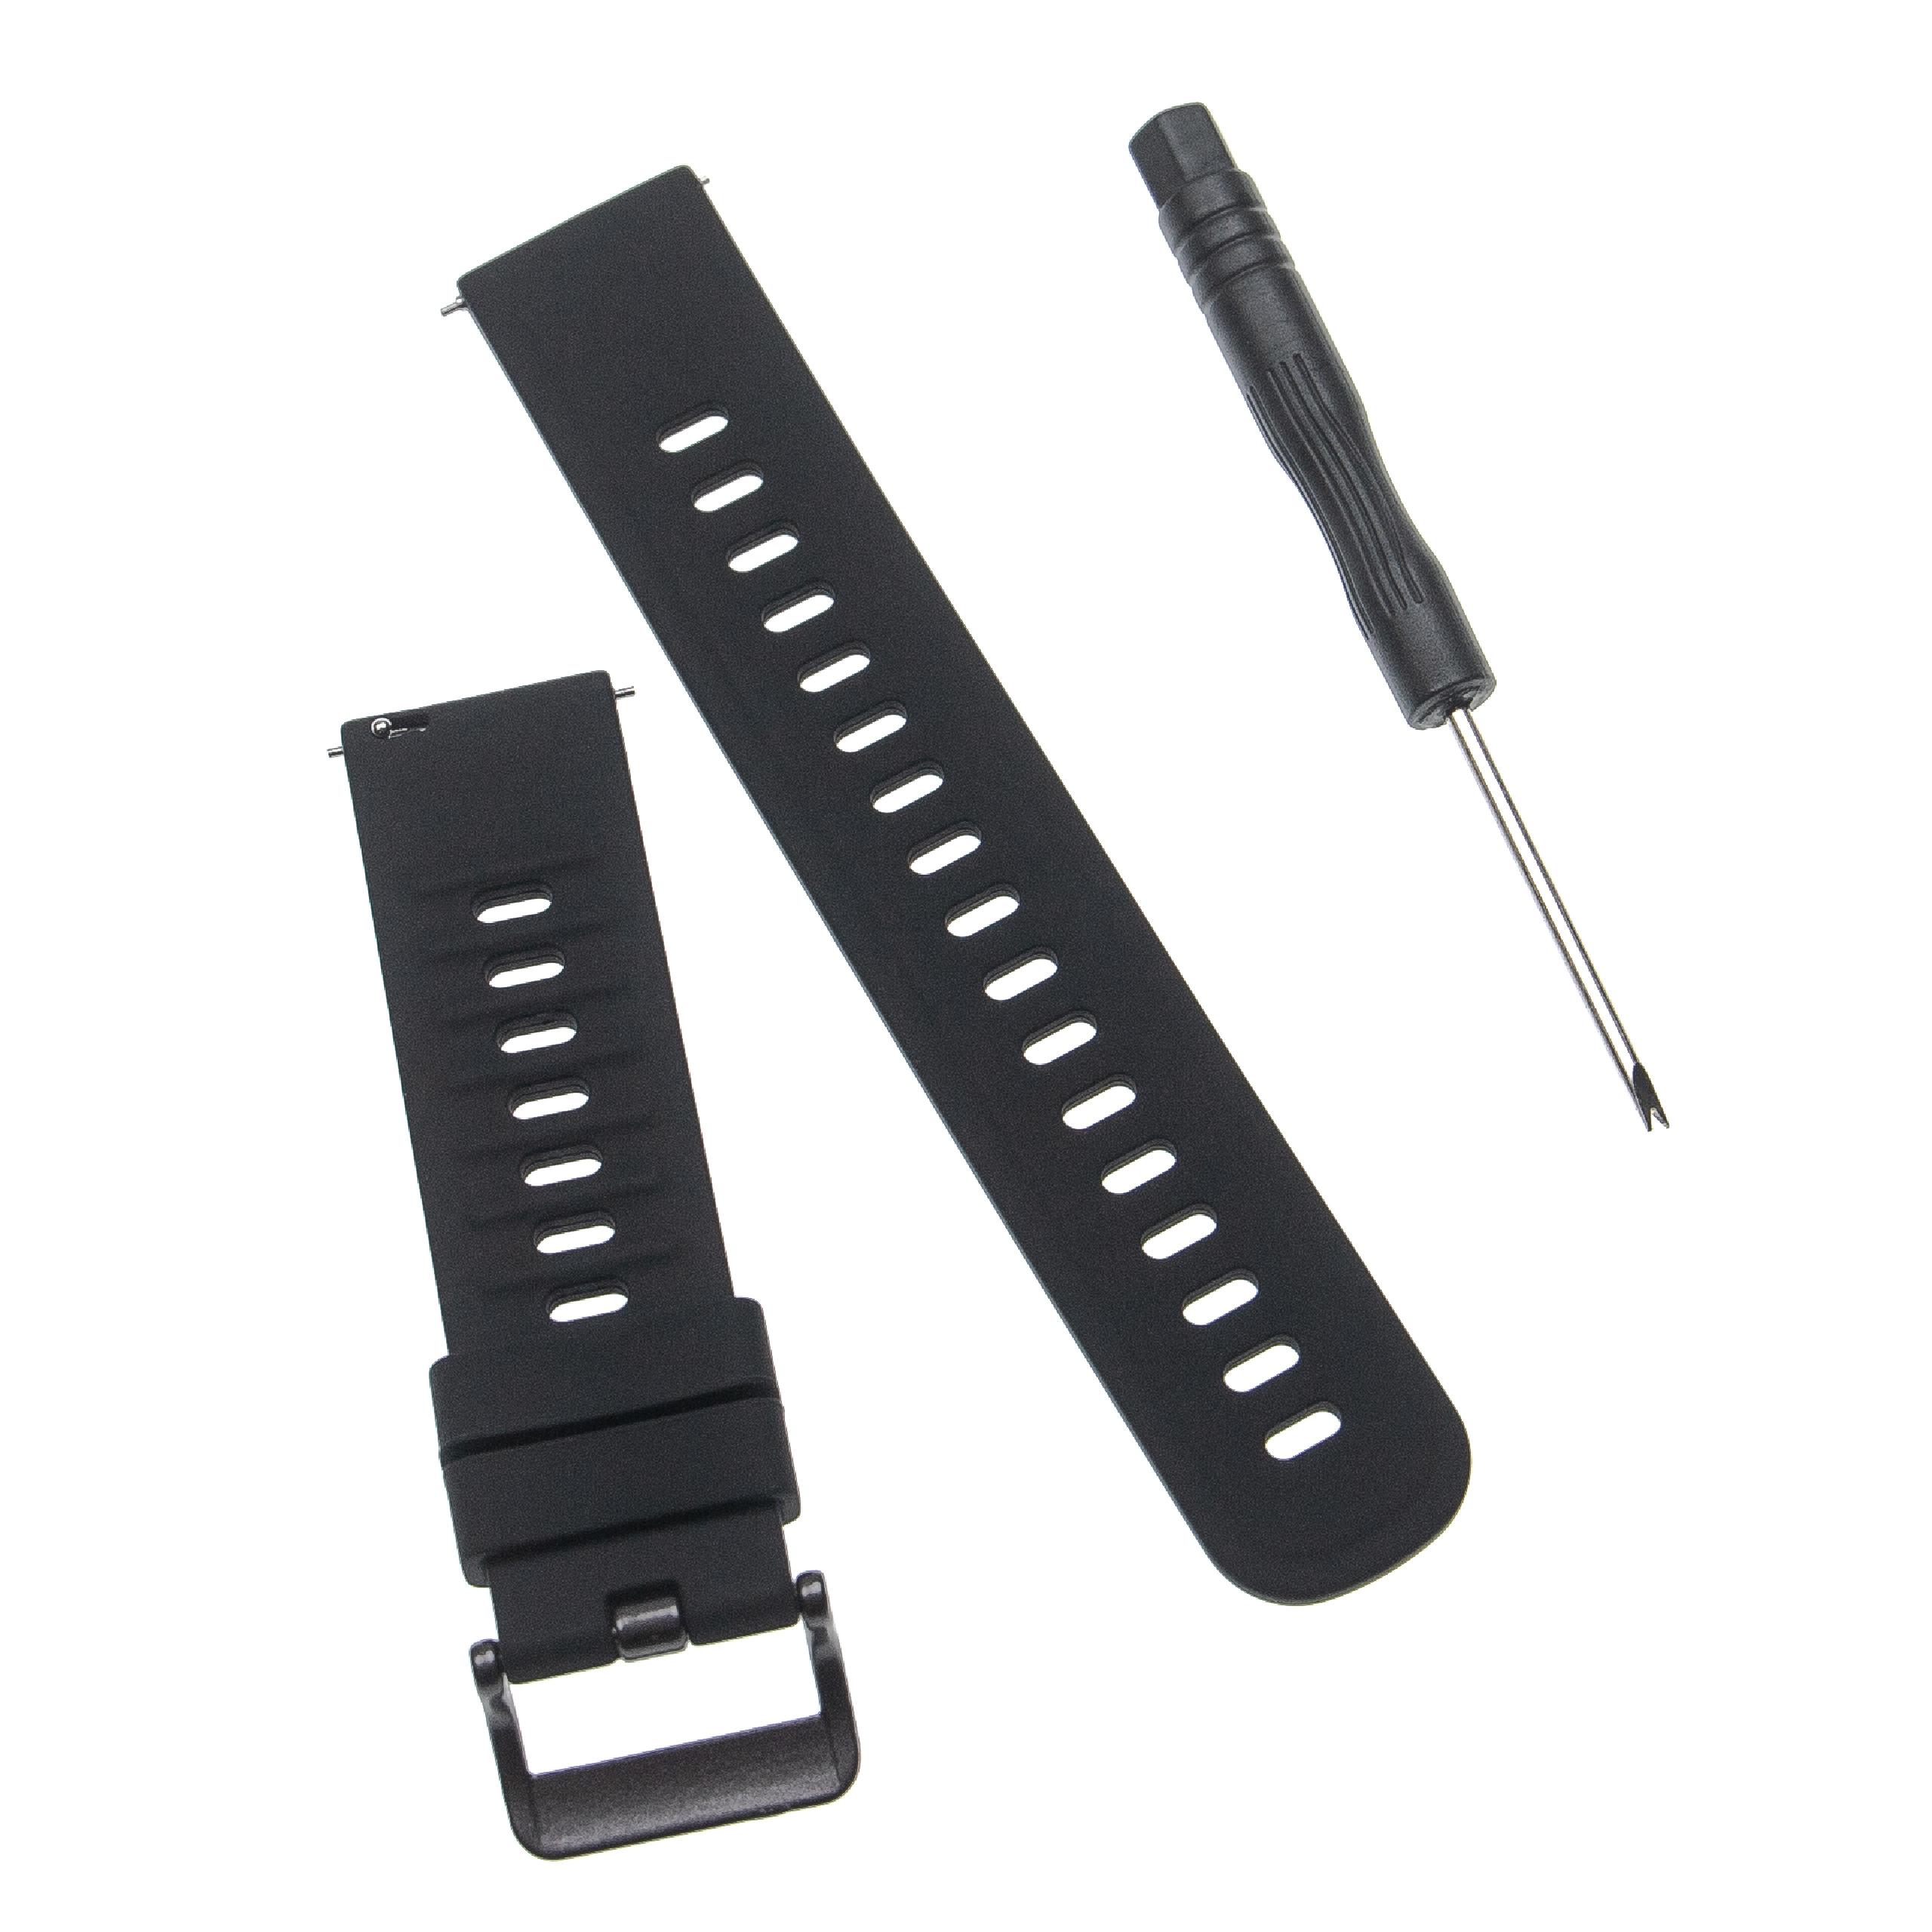 wristband for Amazfit Smartwatch - 12 + 8.5 cm long, 20mm wide, silicone, black